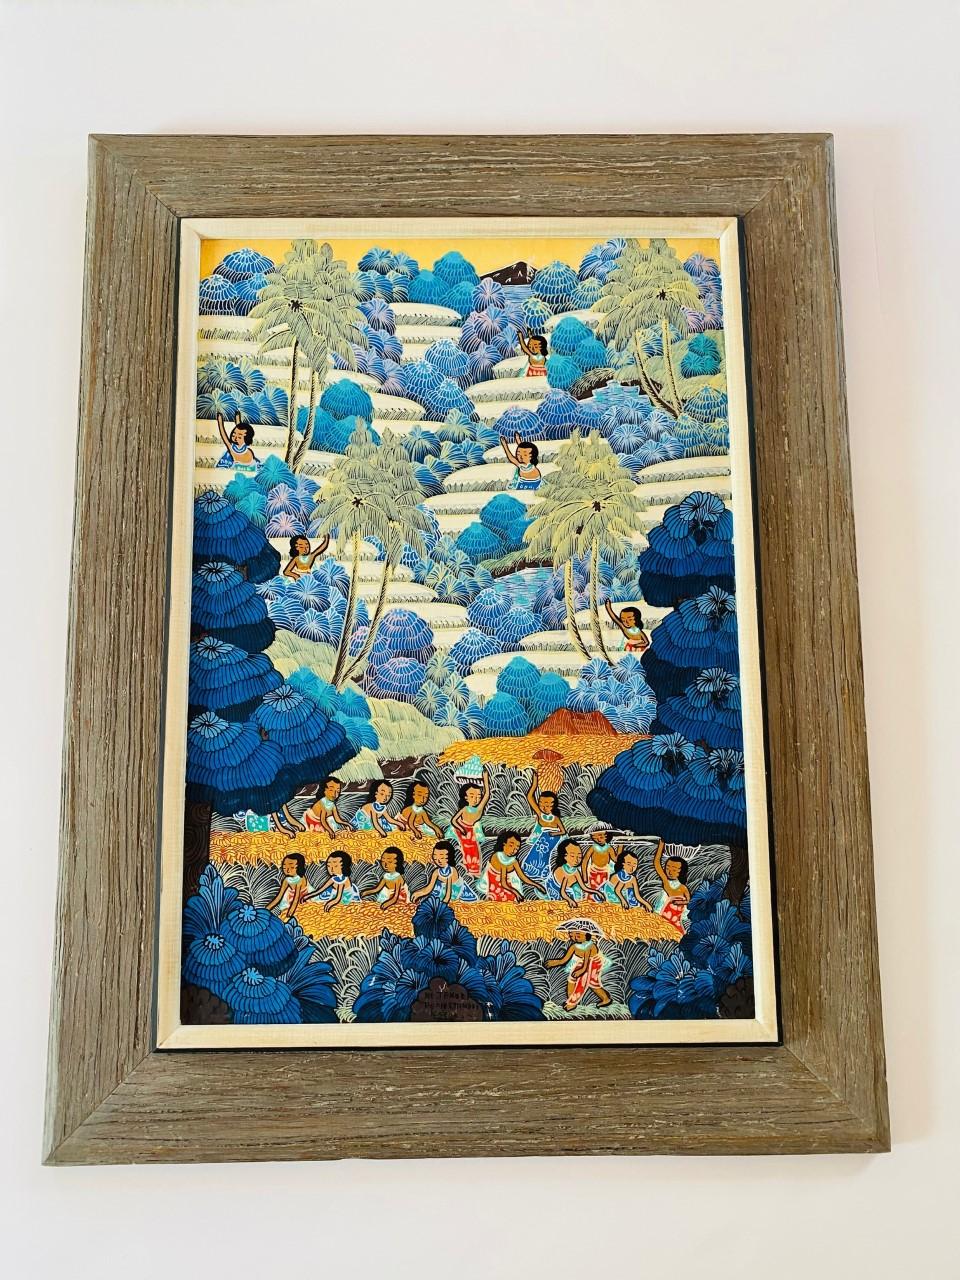 Late 20th Century Vintage Original Painting “Life in Penestanan” by Kt. Teker For Sale